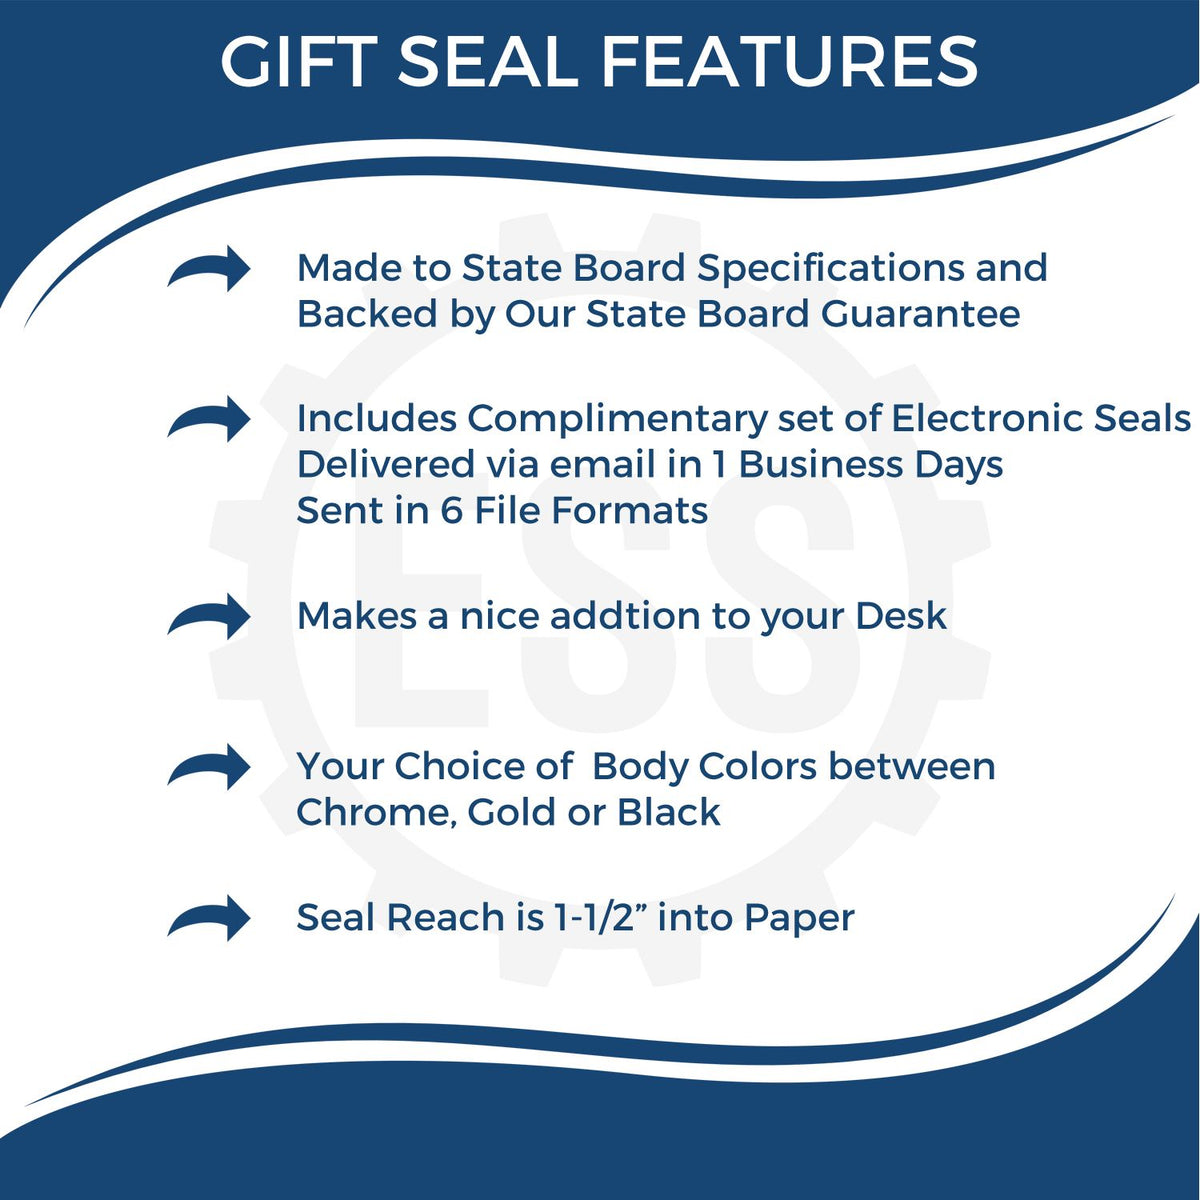 A picture of an infographic highlighting the selling points for the Gift Maryland Land Surveyor Seal